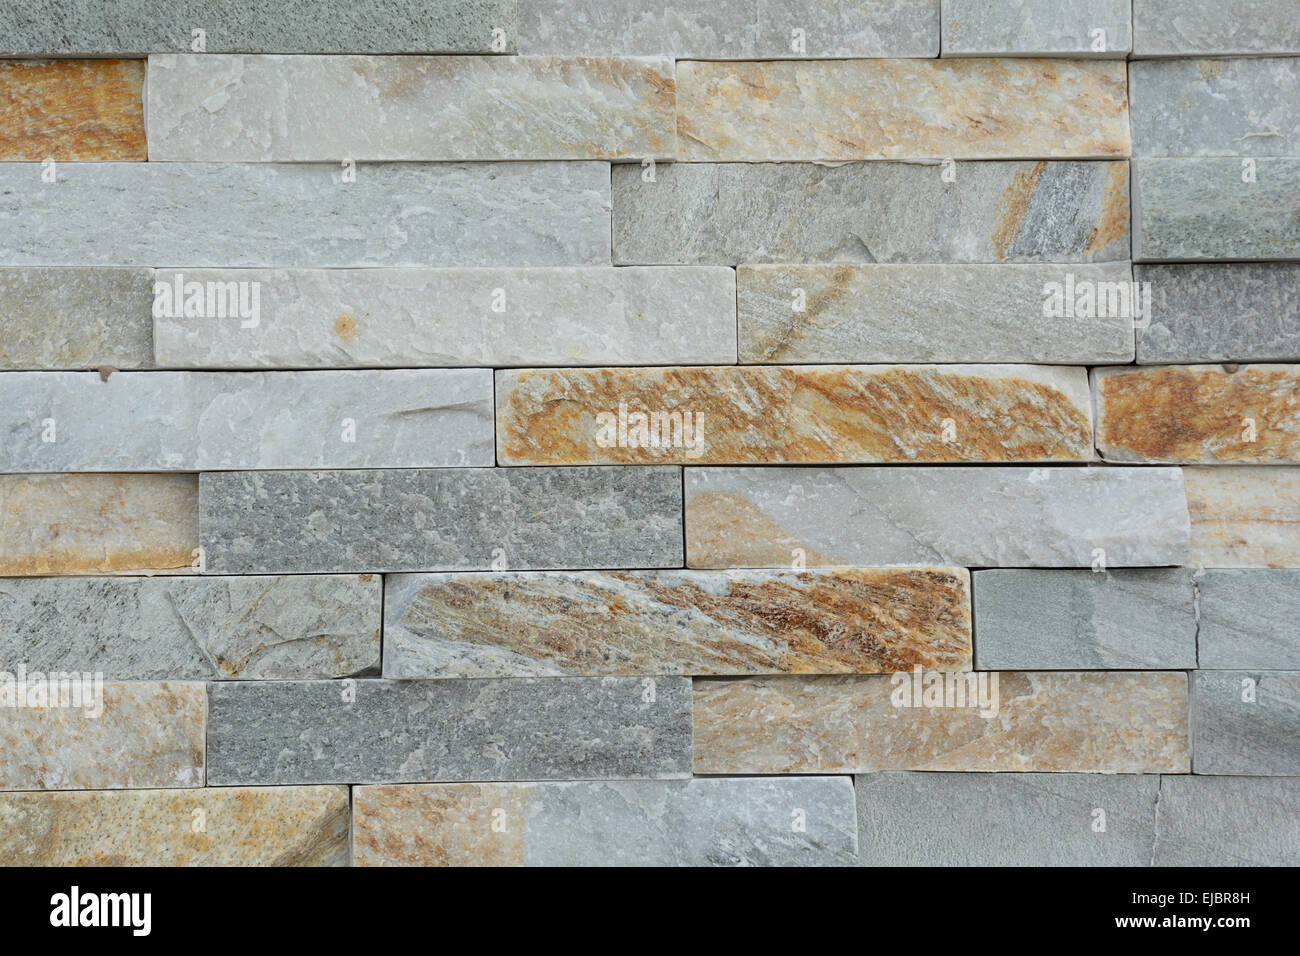 Natural stones of a stone wall Stock Photo